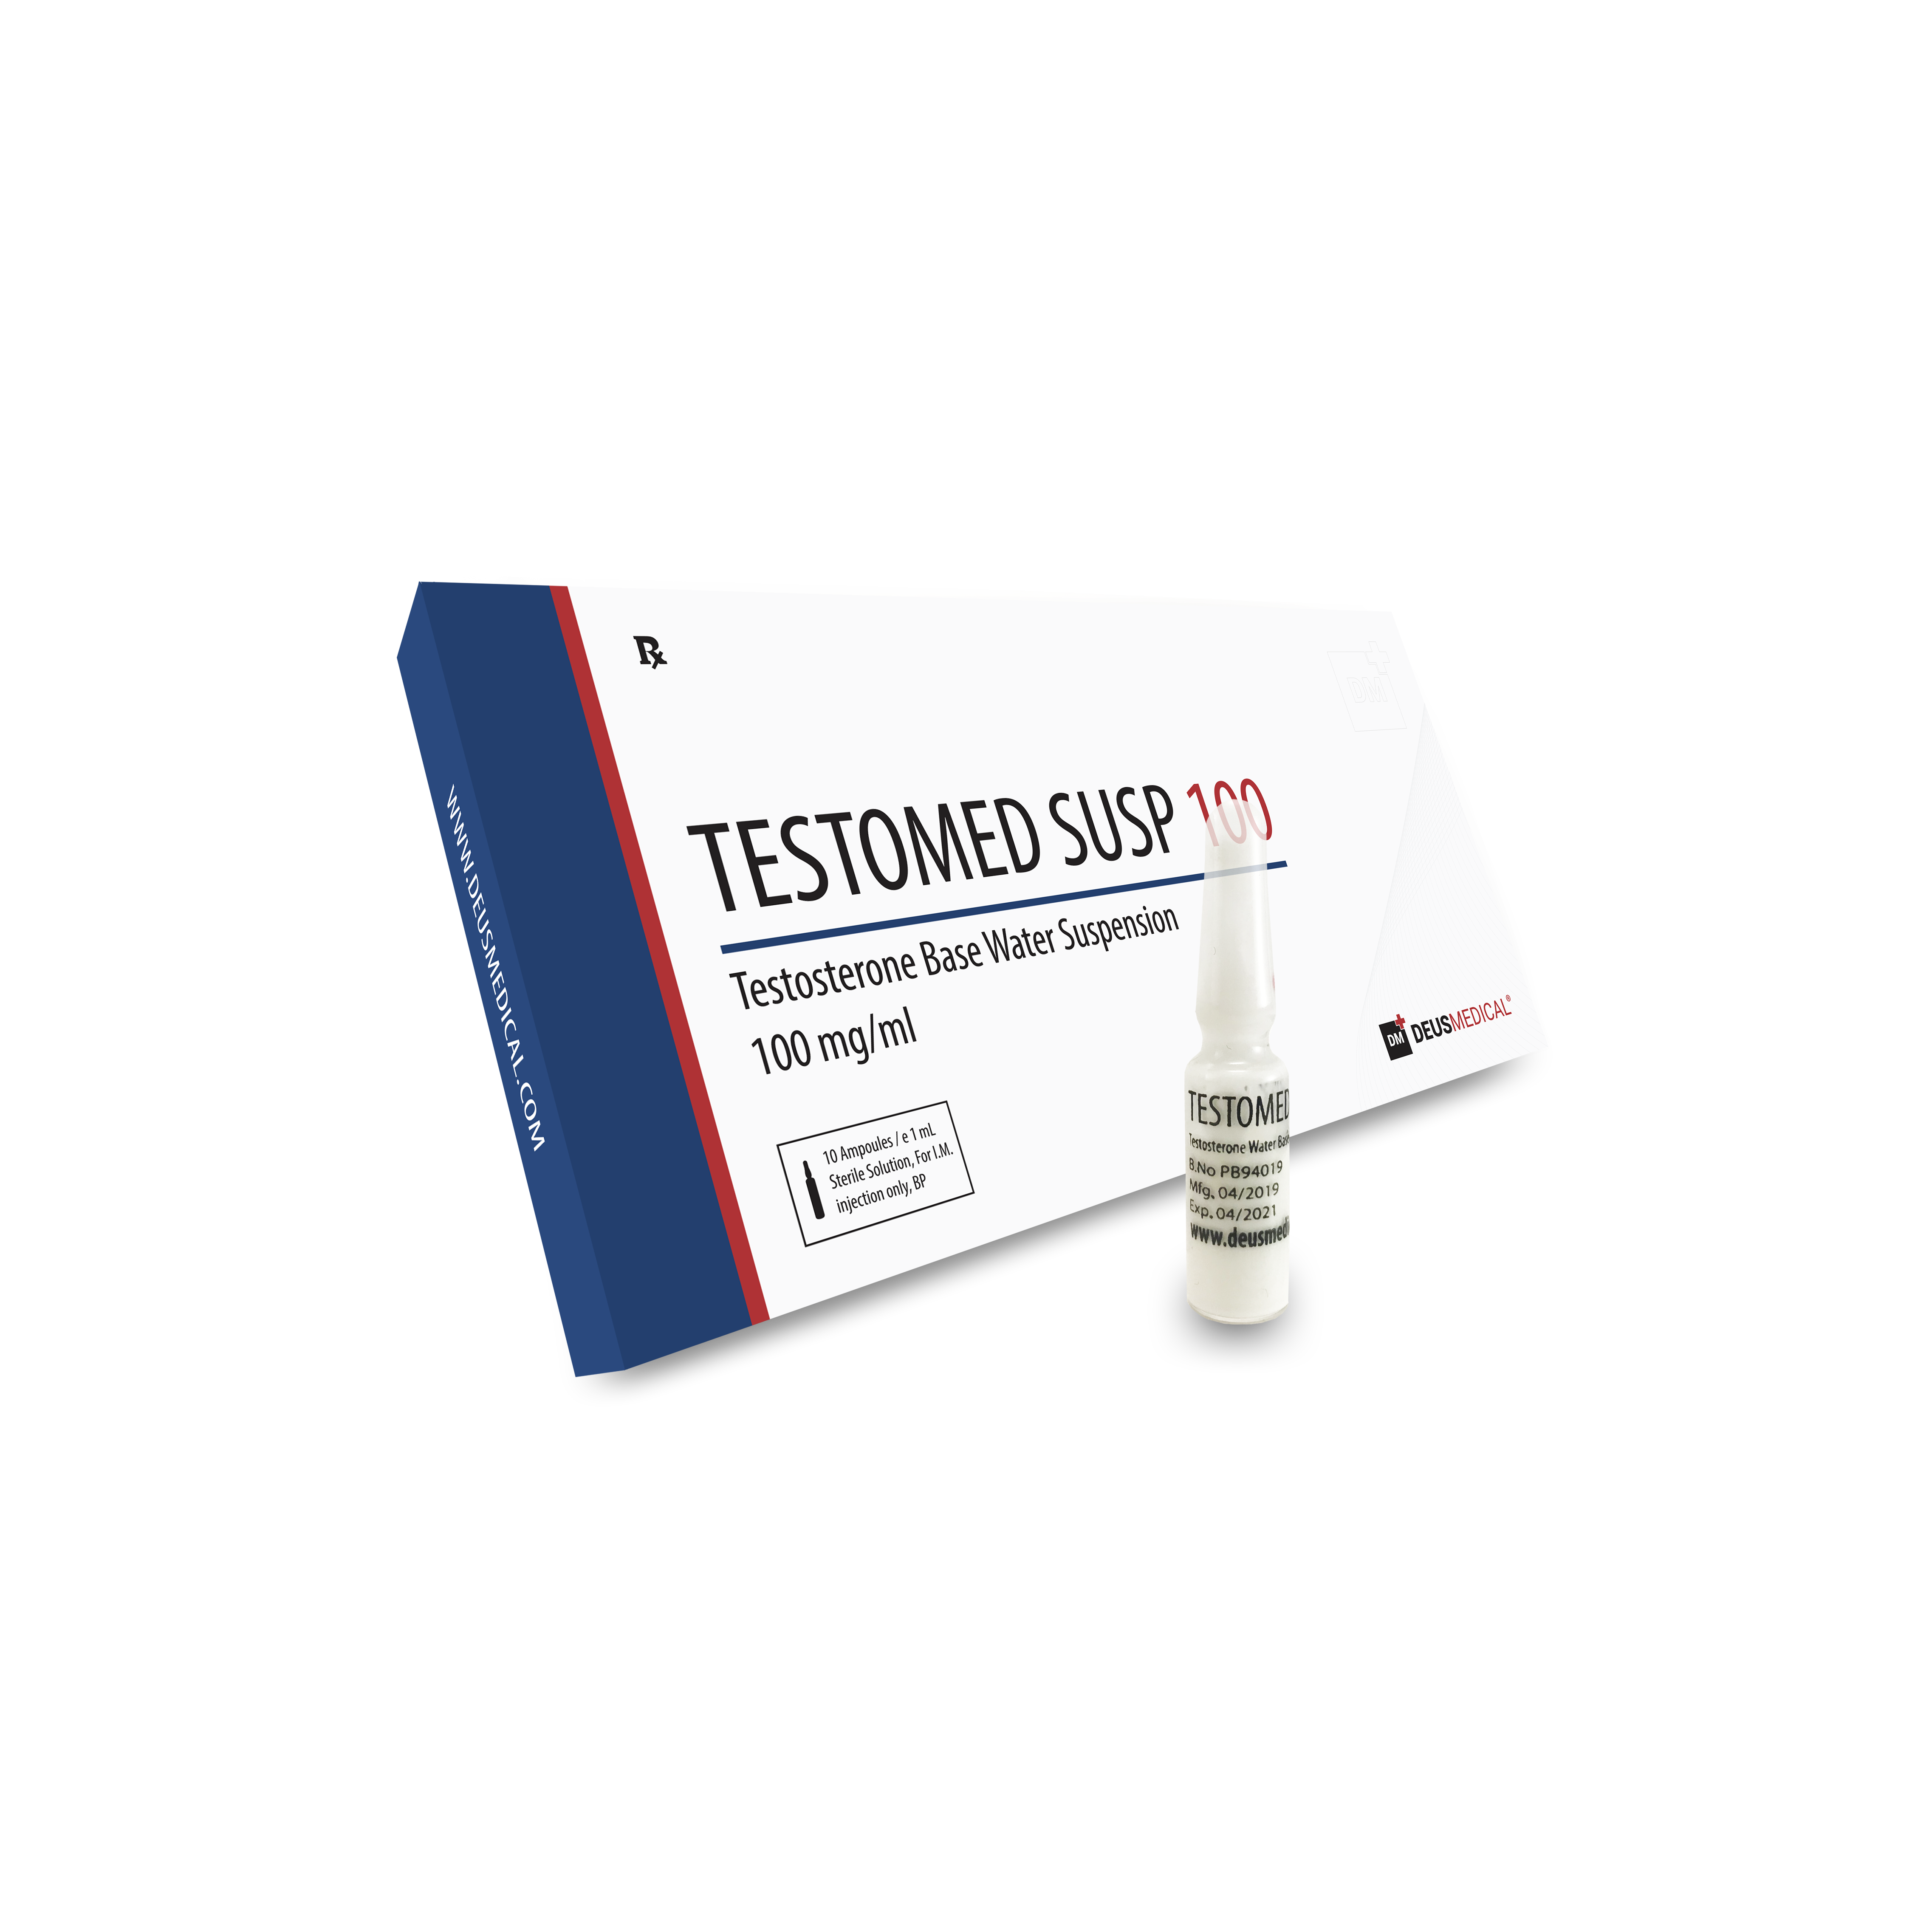 TESTOMED SUSPENSION 100 (Testosterone Base Water Suspension) – 10amps of 1ml